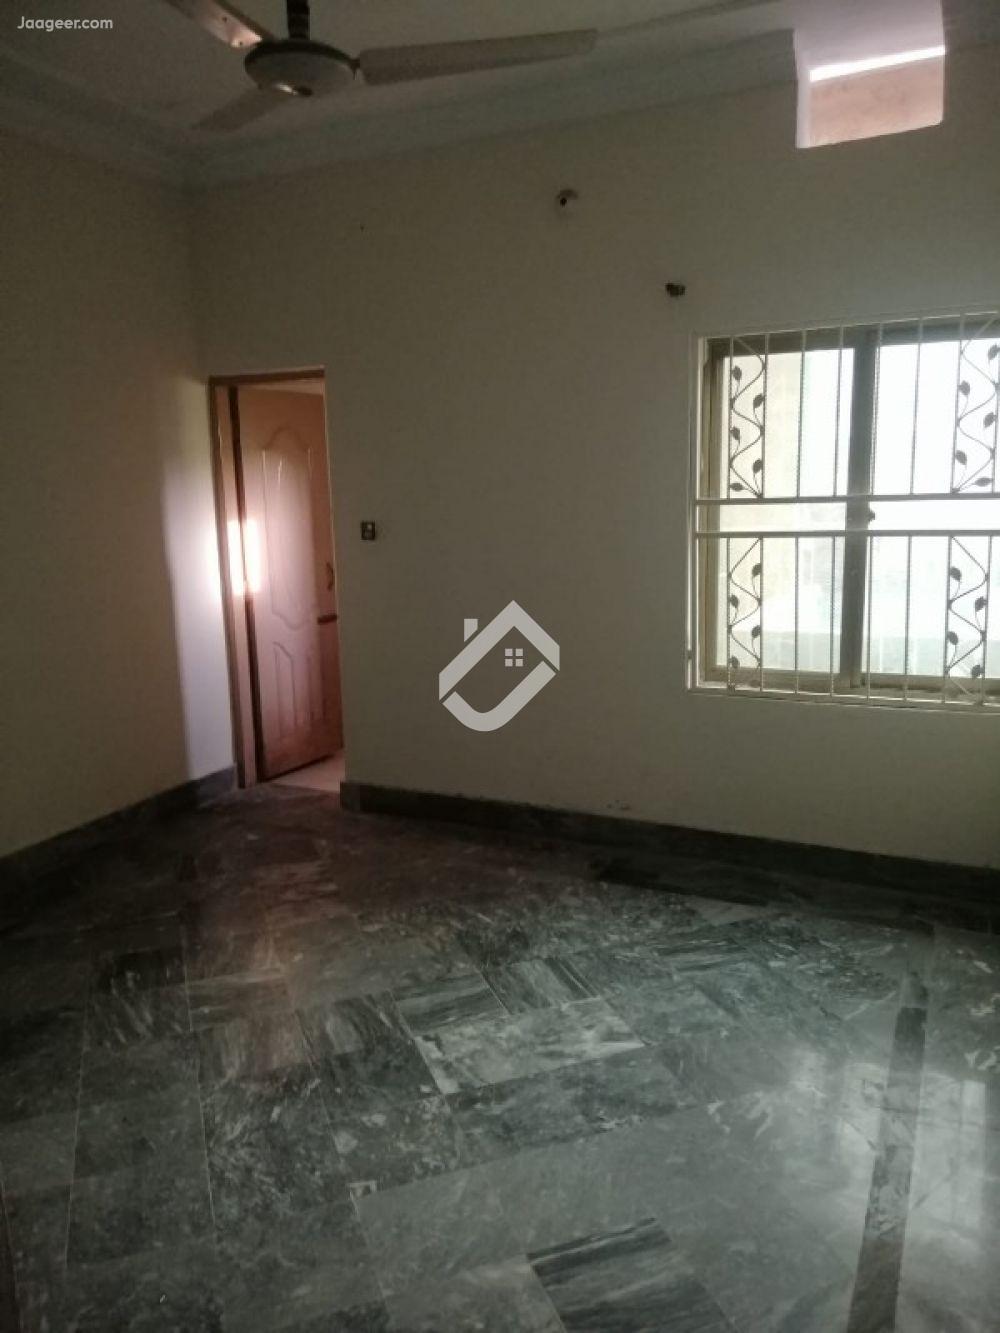 View  5 Marla Upper Portion House For Rent In Cheema Colony  in Cheema Colony, Sargodha